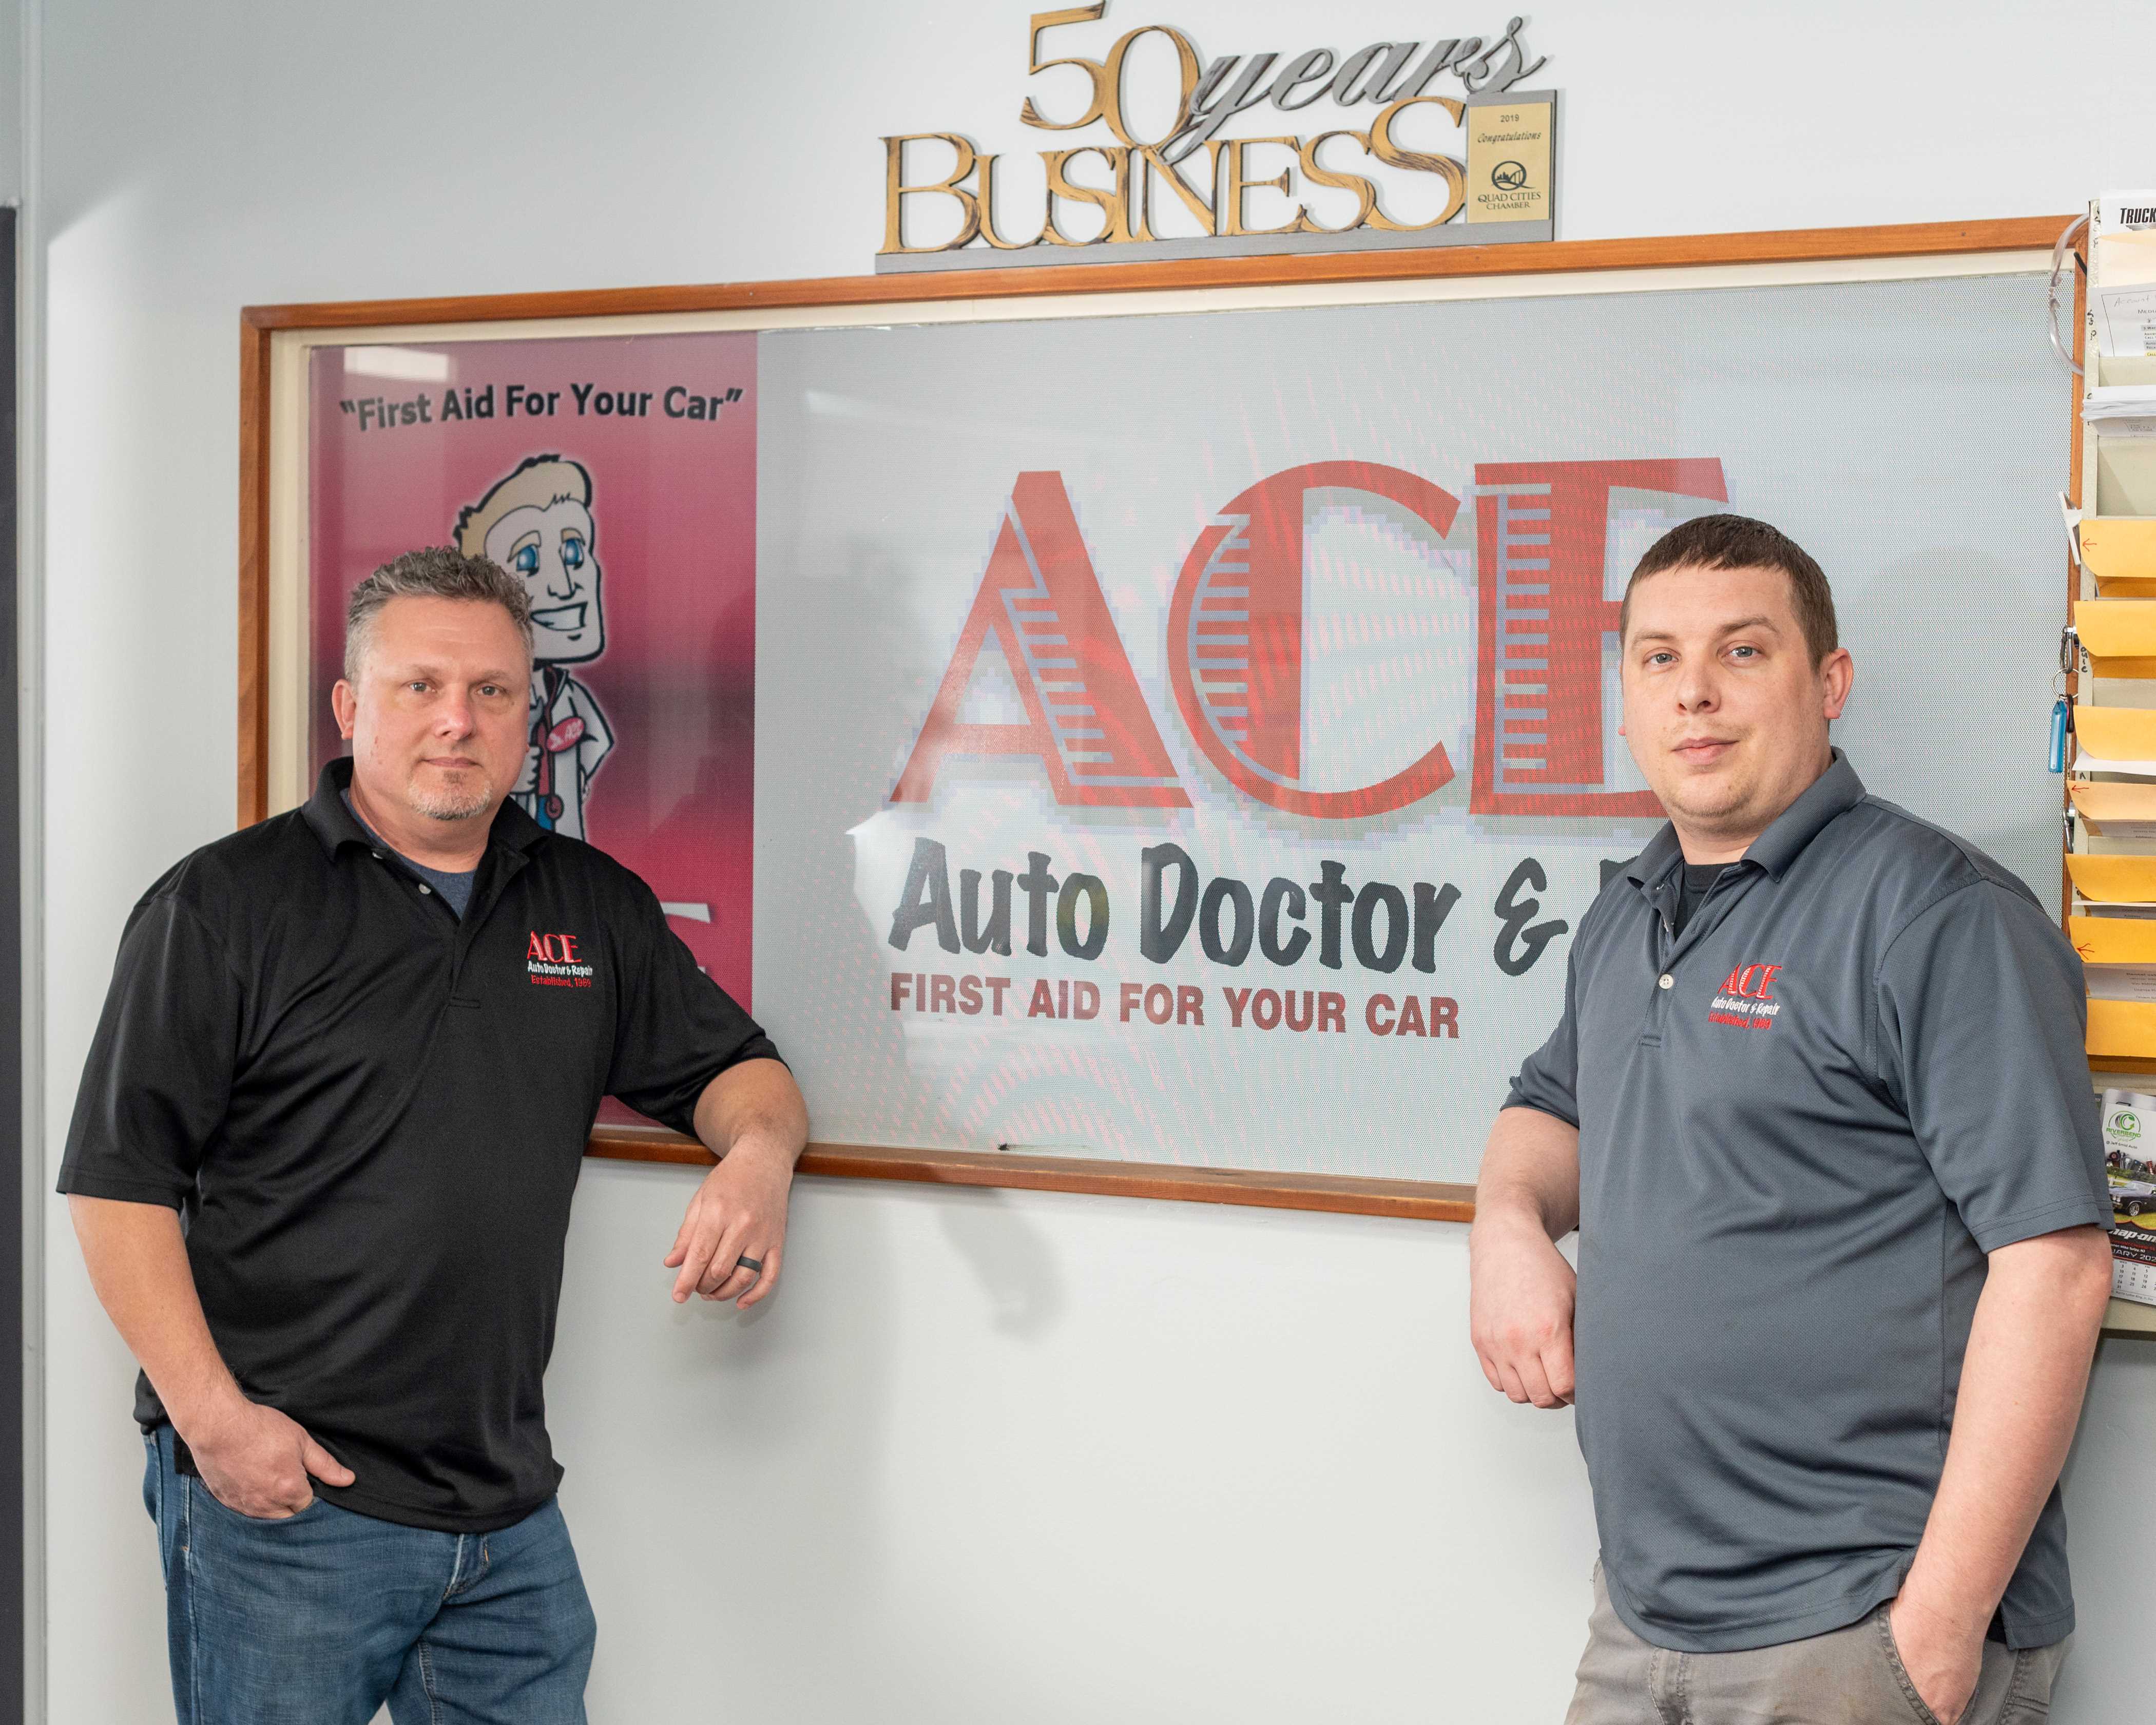 Ace Auto Doctor & Repair: Three generations of customer excellence